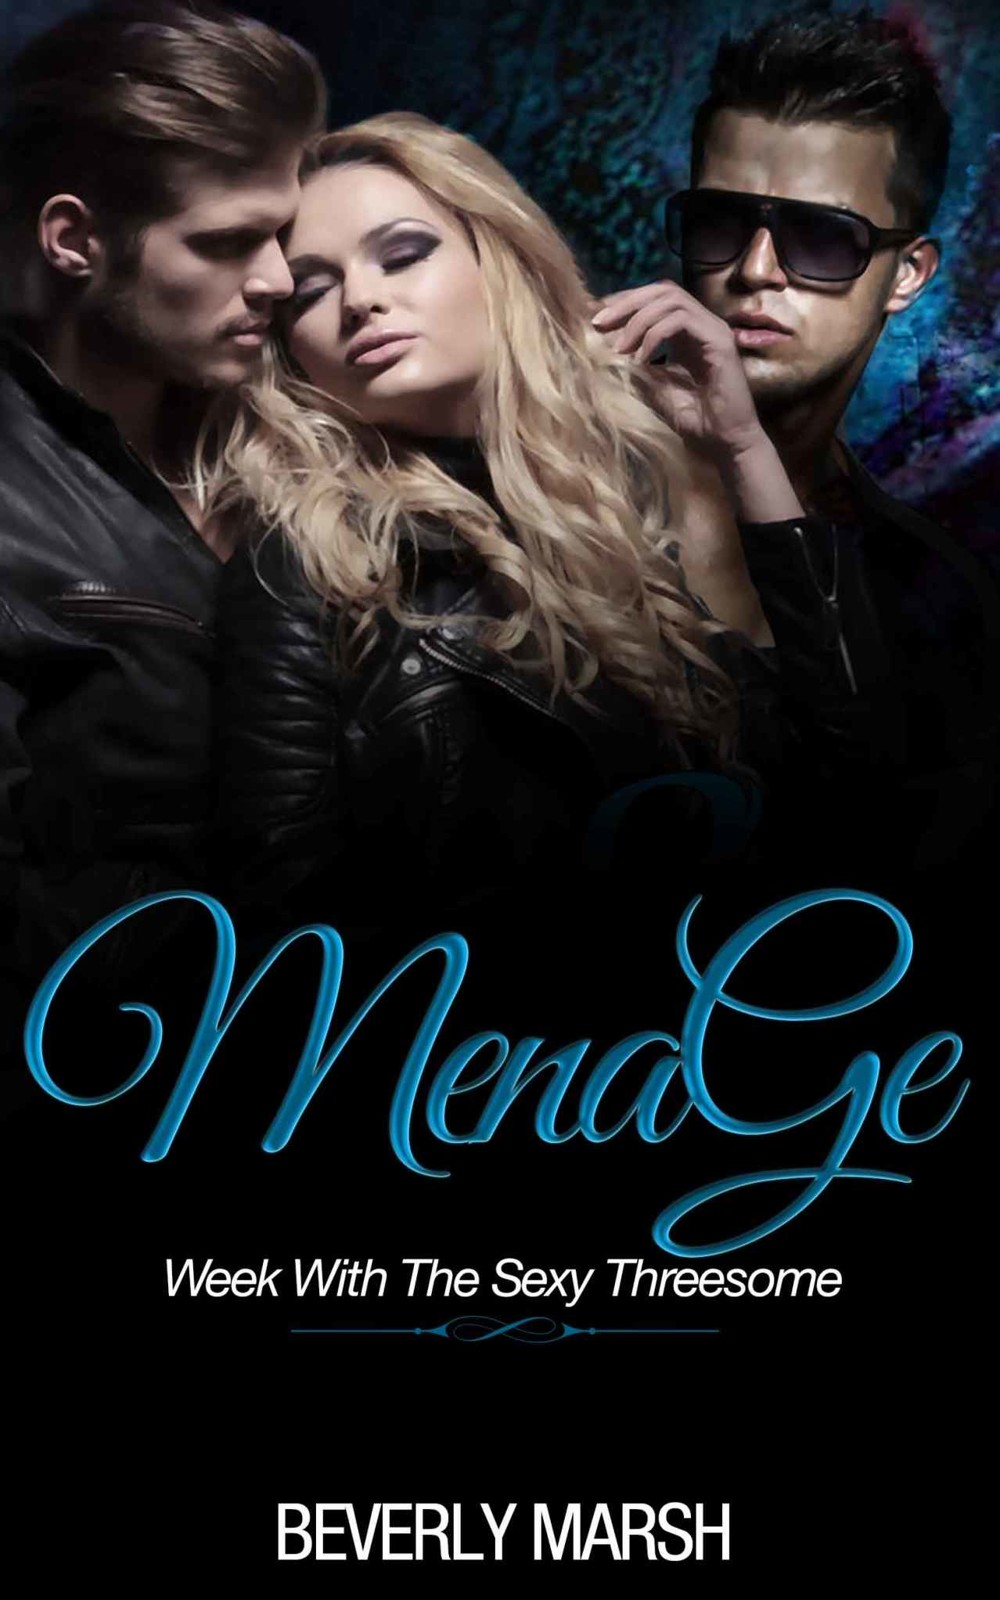 Read Free Threesome Menage Week With The Sexy Threesome Threesome Romance Menage Romance